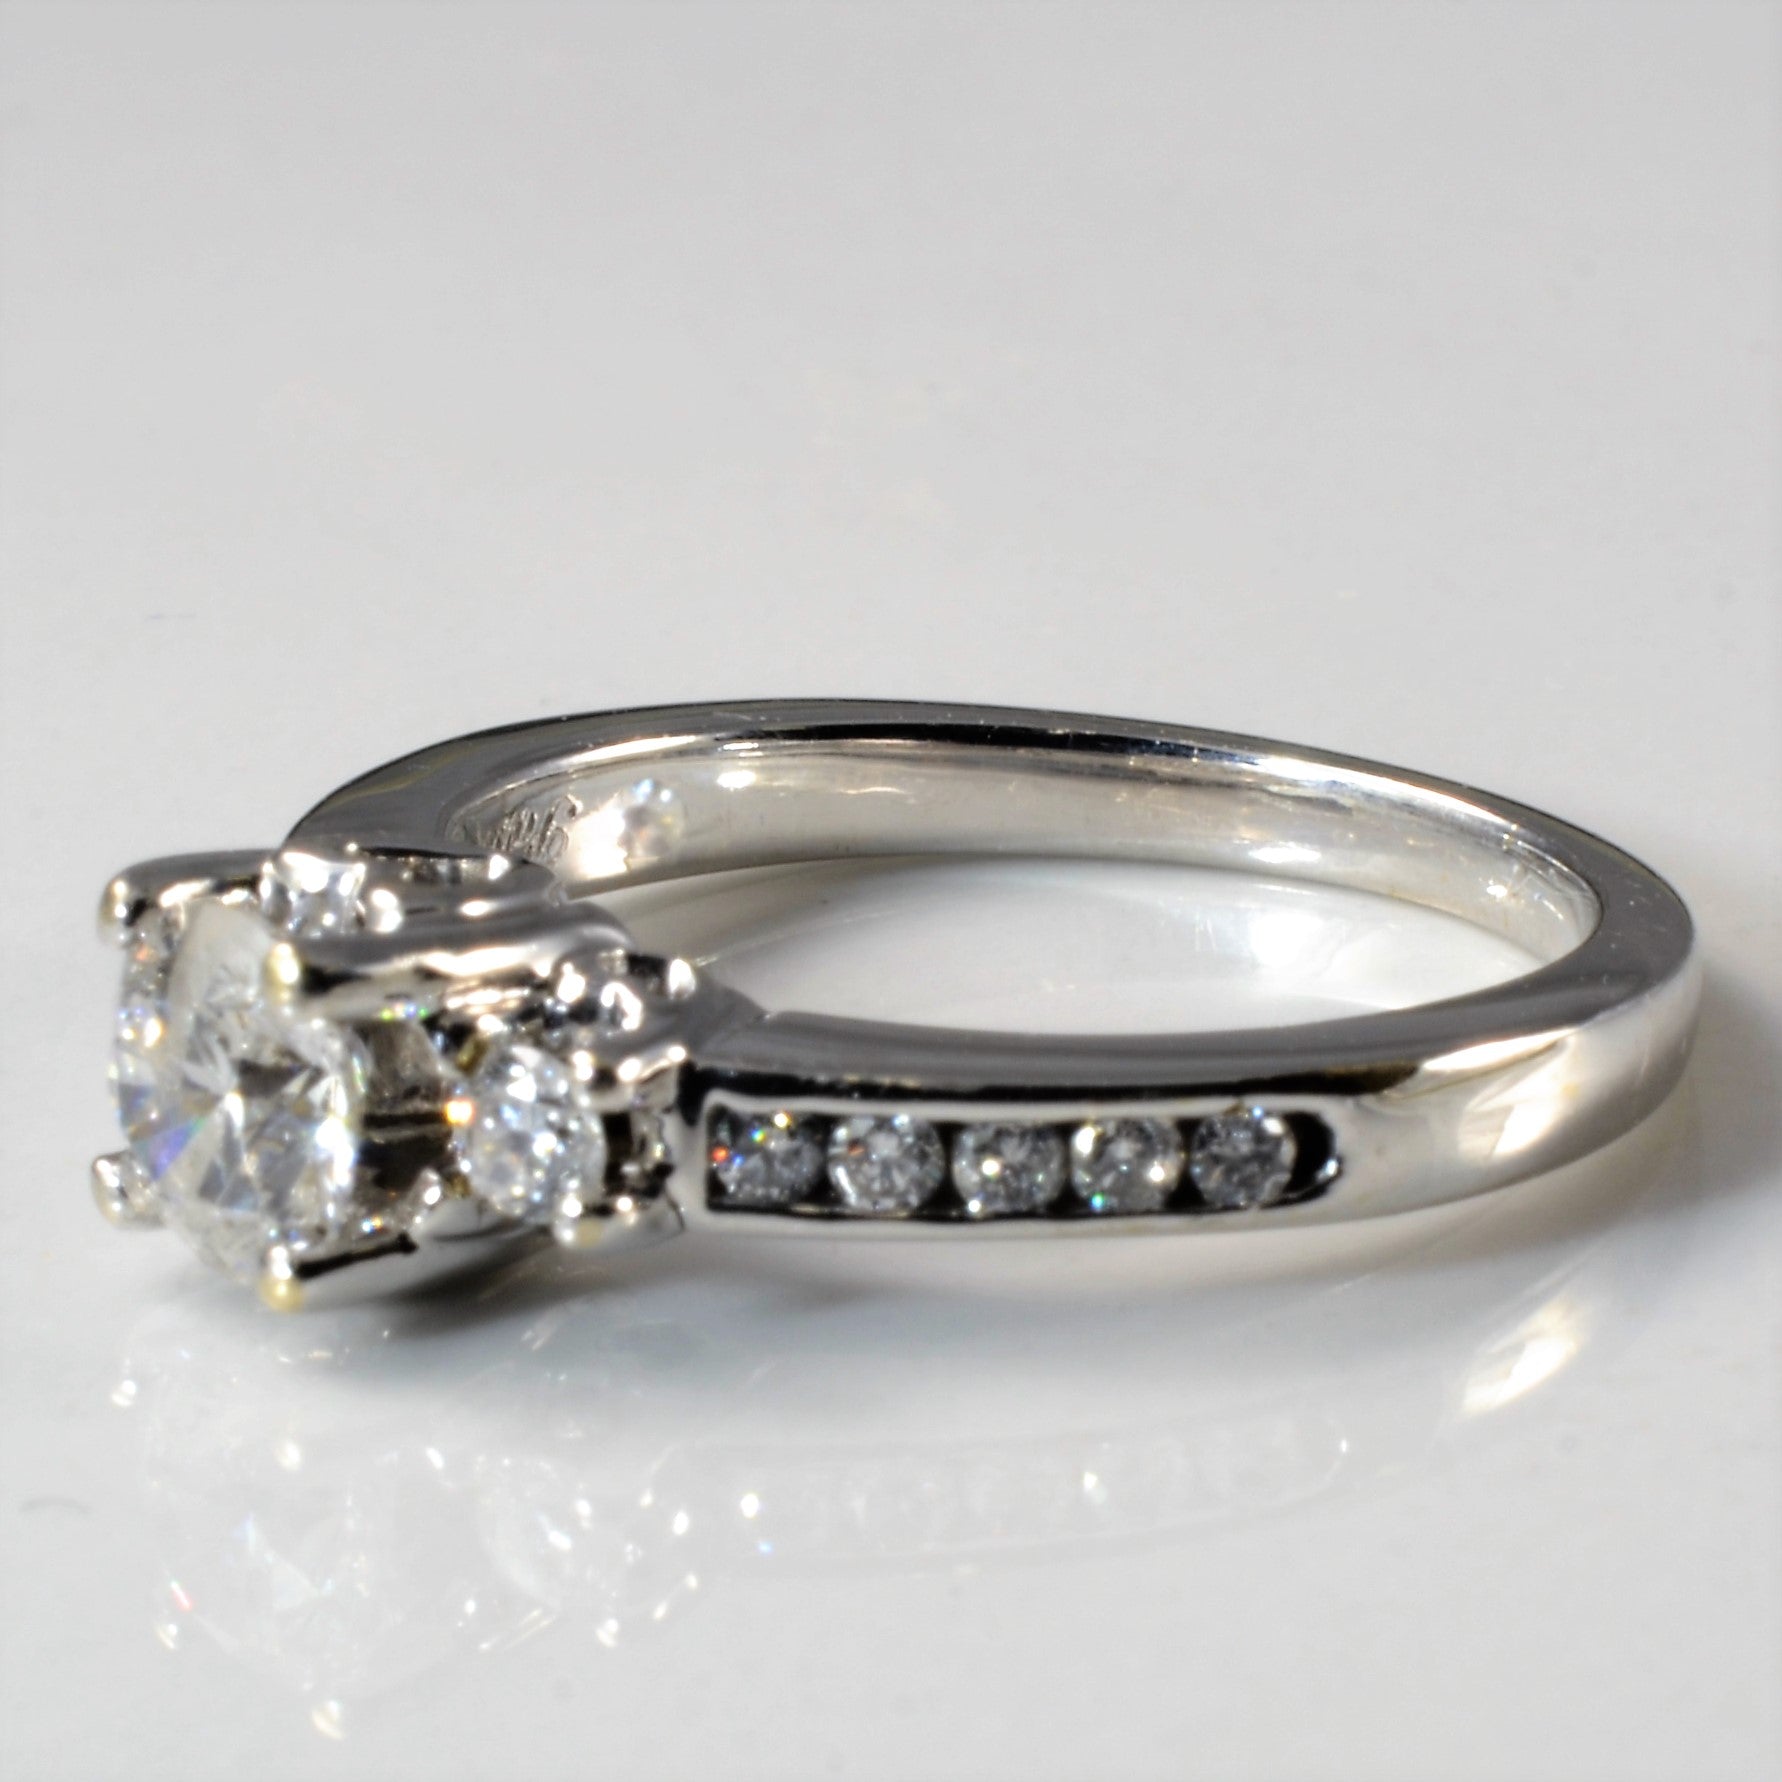 Past, Present, Future Heart Detailed Engagement Ring | 0.72ctw | SZ 5.5 |